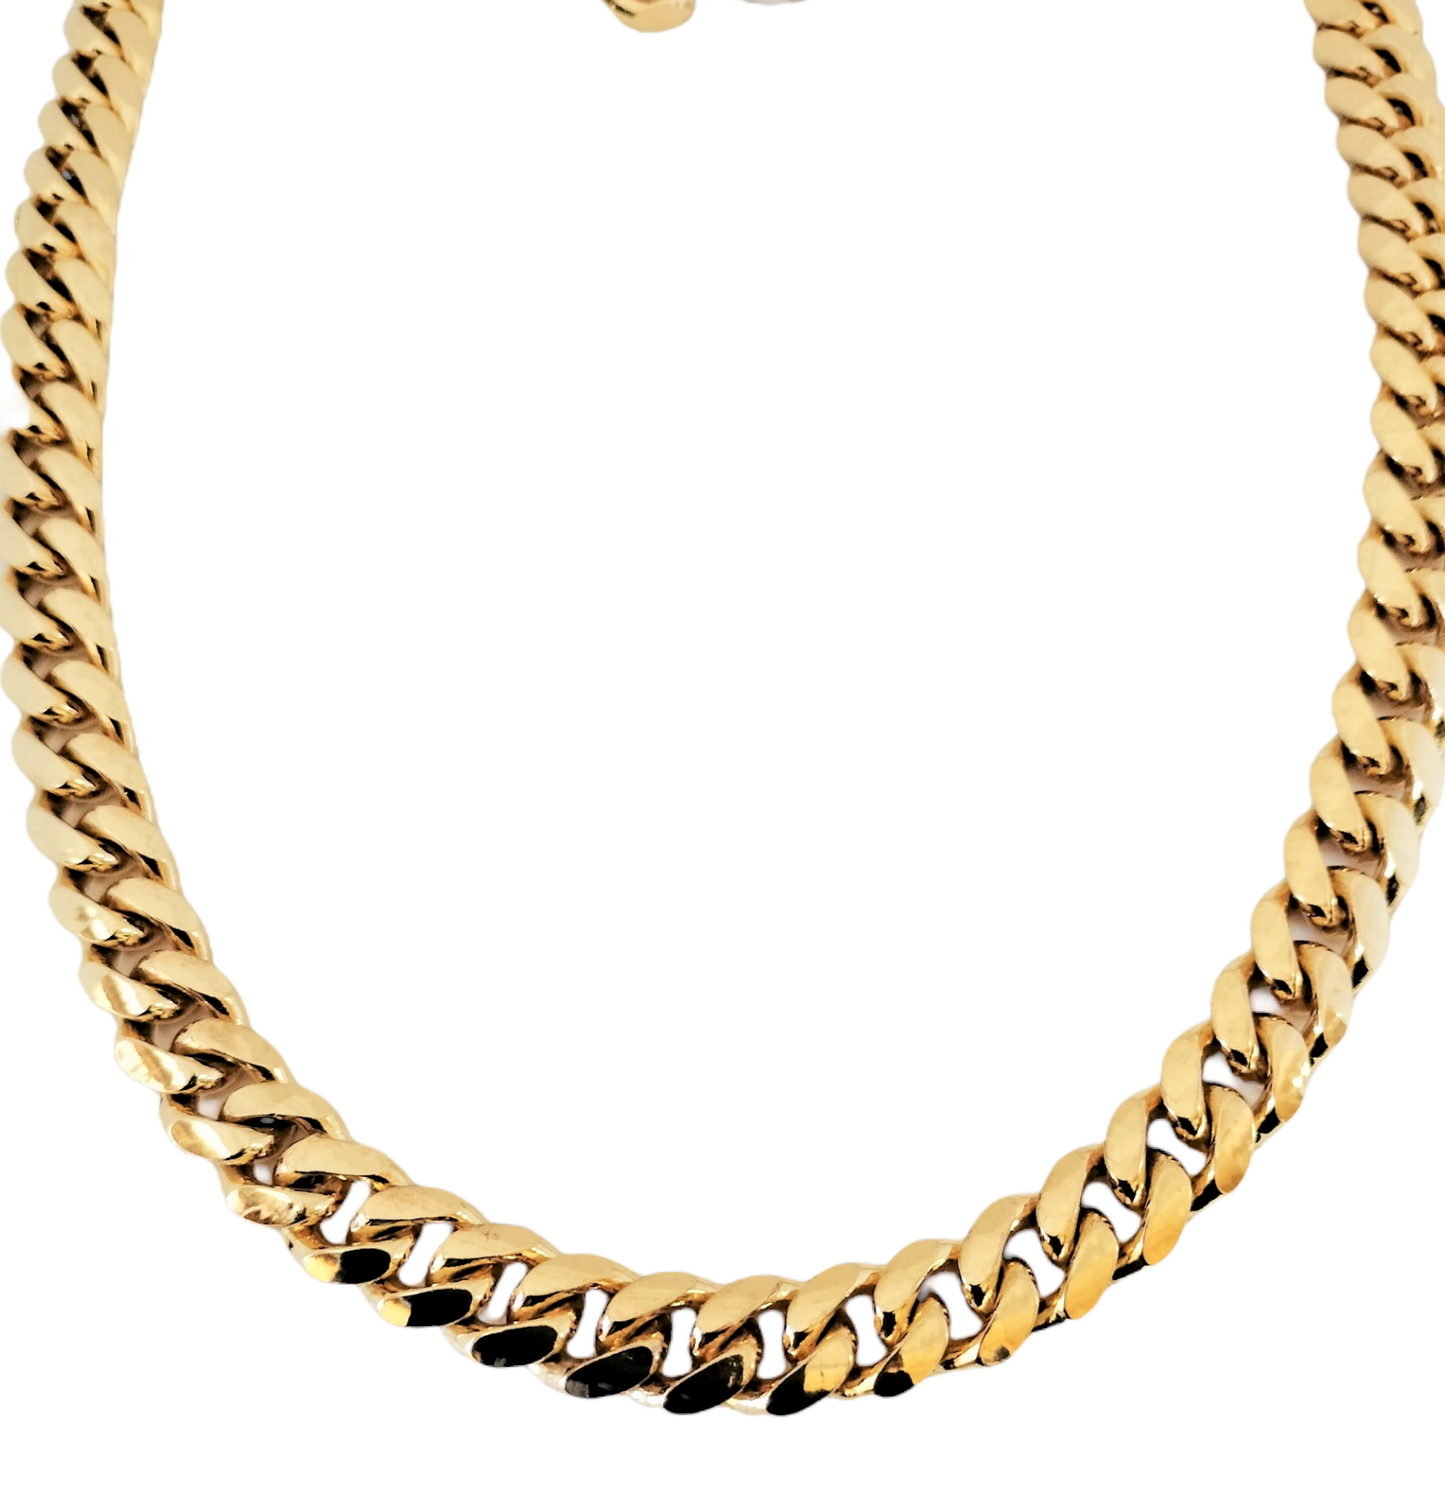 Cuban Link 925 Silver 24k Yellow Gold Plated Necklace